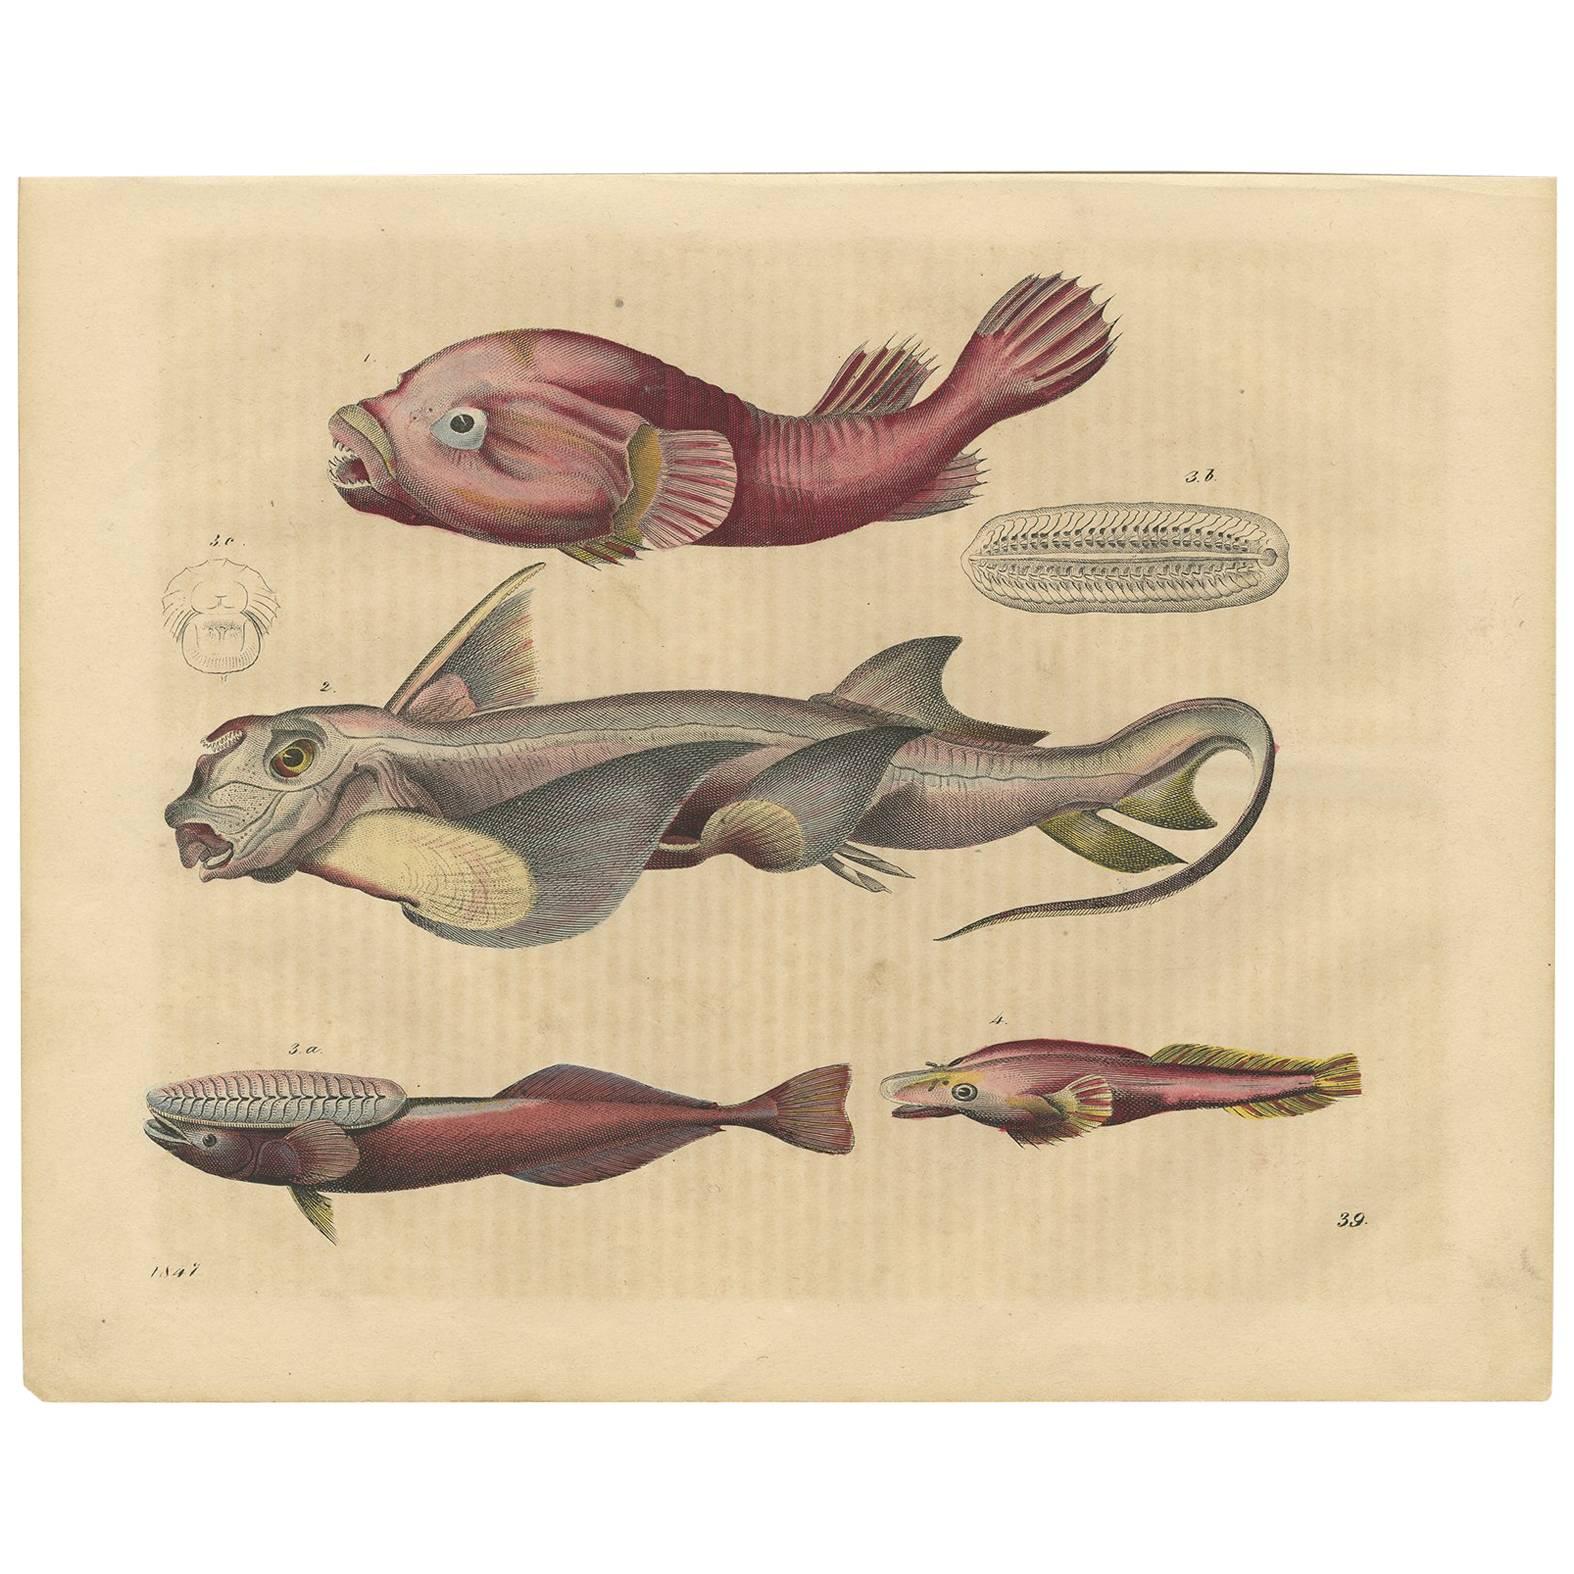 Antique Animal Print of Clingfishes by C. Hoffmann, 1847